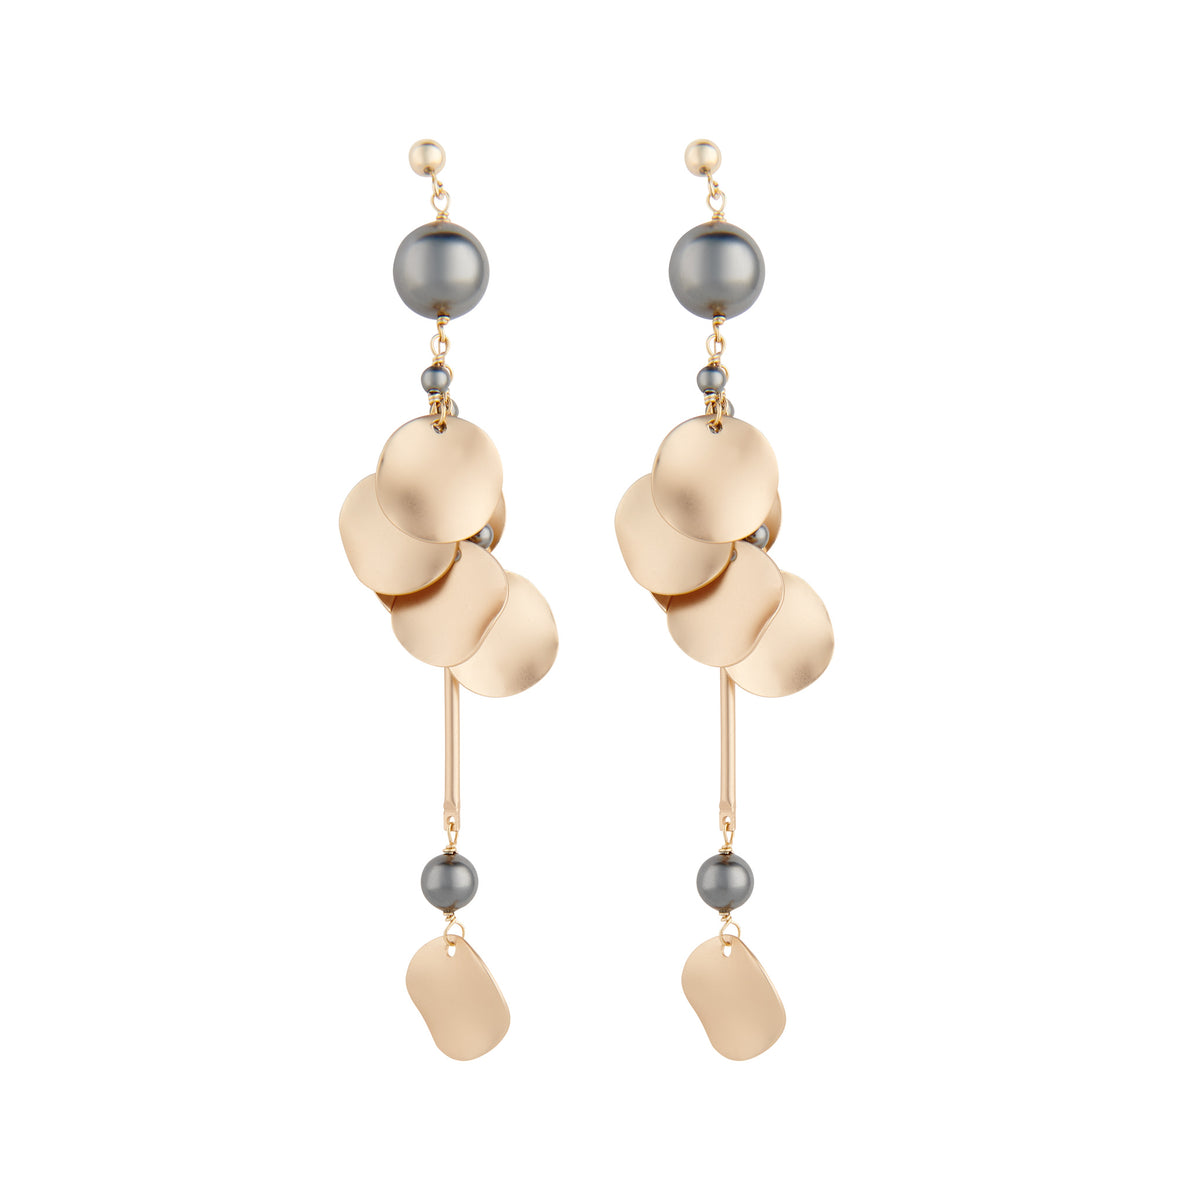 Matte gold ripple disc statement earrings with grey pearls by vivien walsh